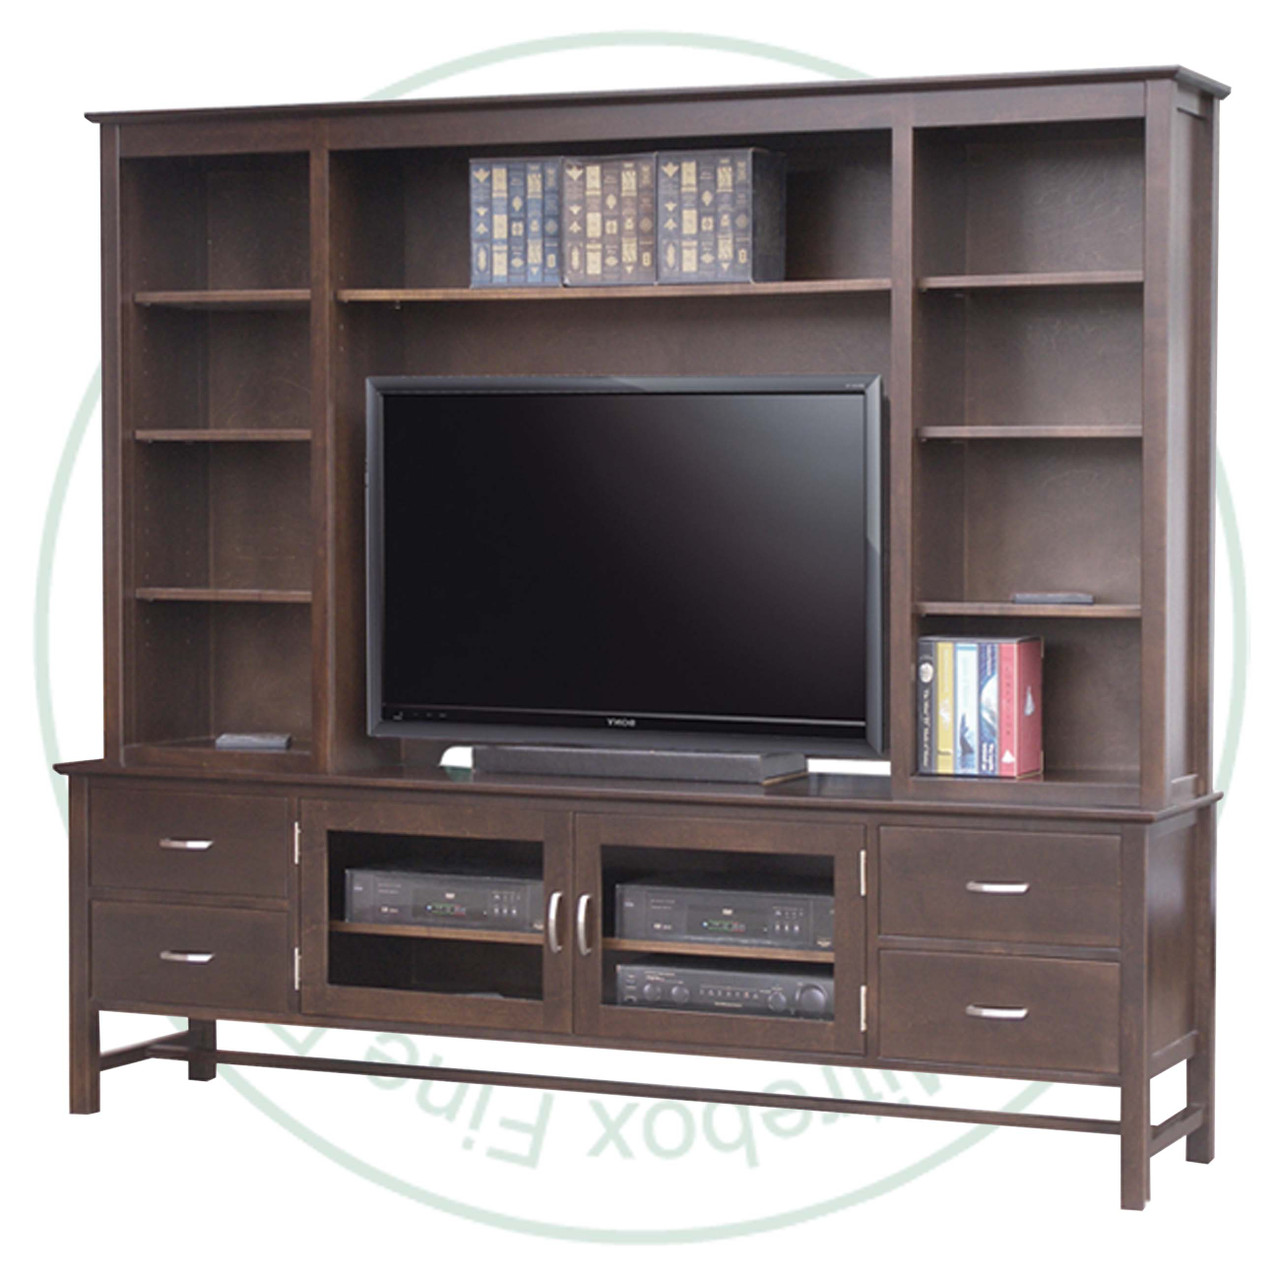 Wormy Maple Brooklyn HDTV Entertainment Cabinet With Hutch 19.5'' Deep x 85'' Wide x 77'' High